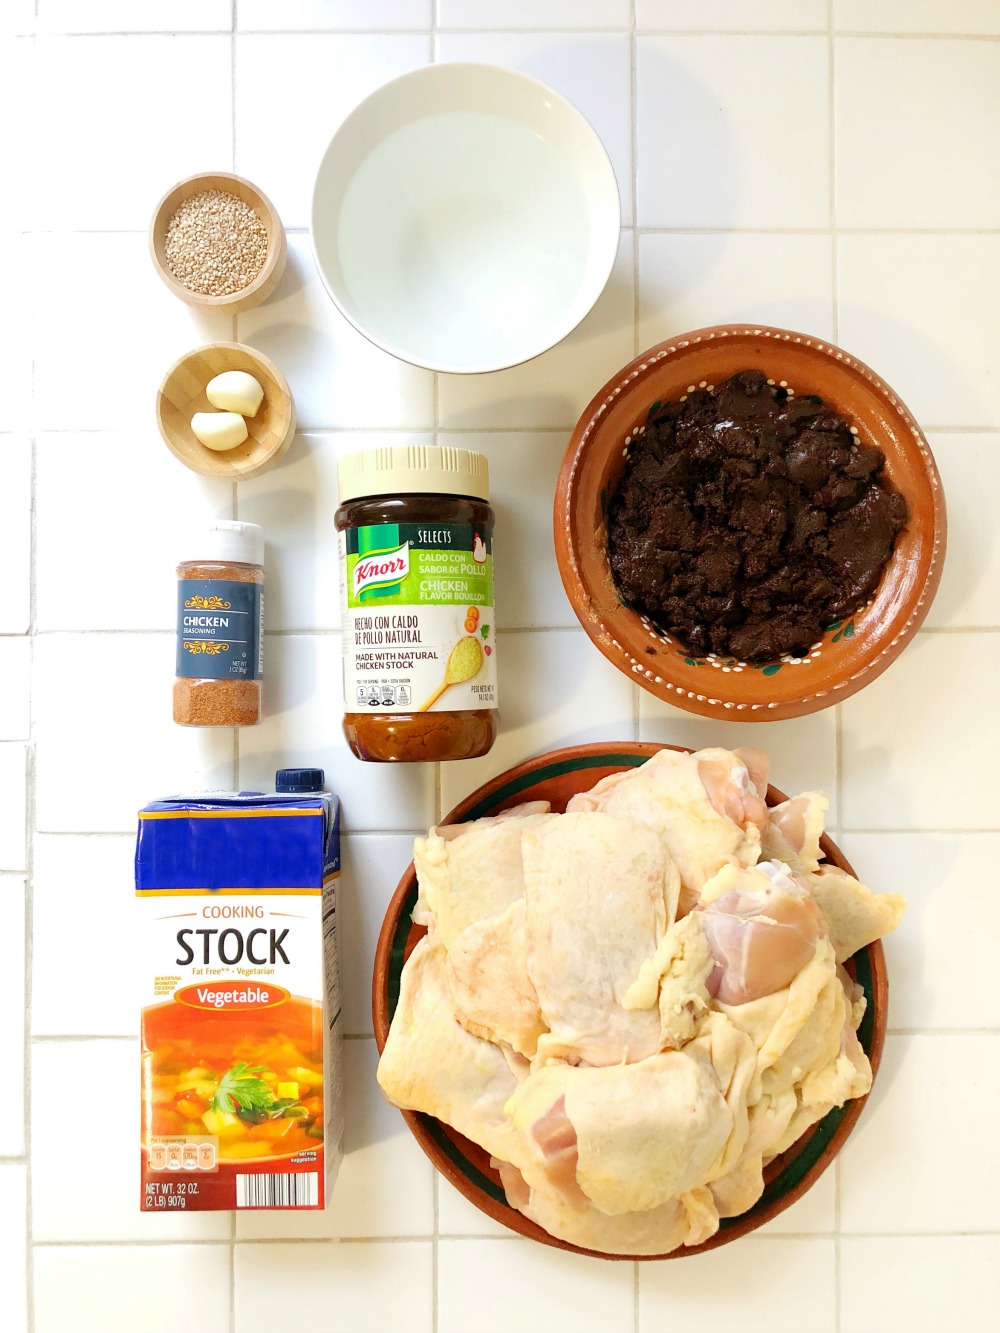 Classic red mole recipe. Make this traditional mole with chicken in under an hour! | LivingMiVidaLoca.com | #LivingMiVidaLoca #Mole #MoleinChicken #ChickeninMole #ChickenMole #TraditionalMexicanRecipes #MexicanFood #MexicanMole